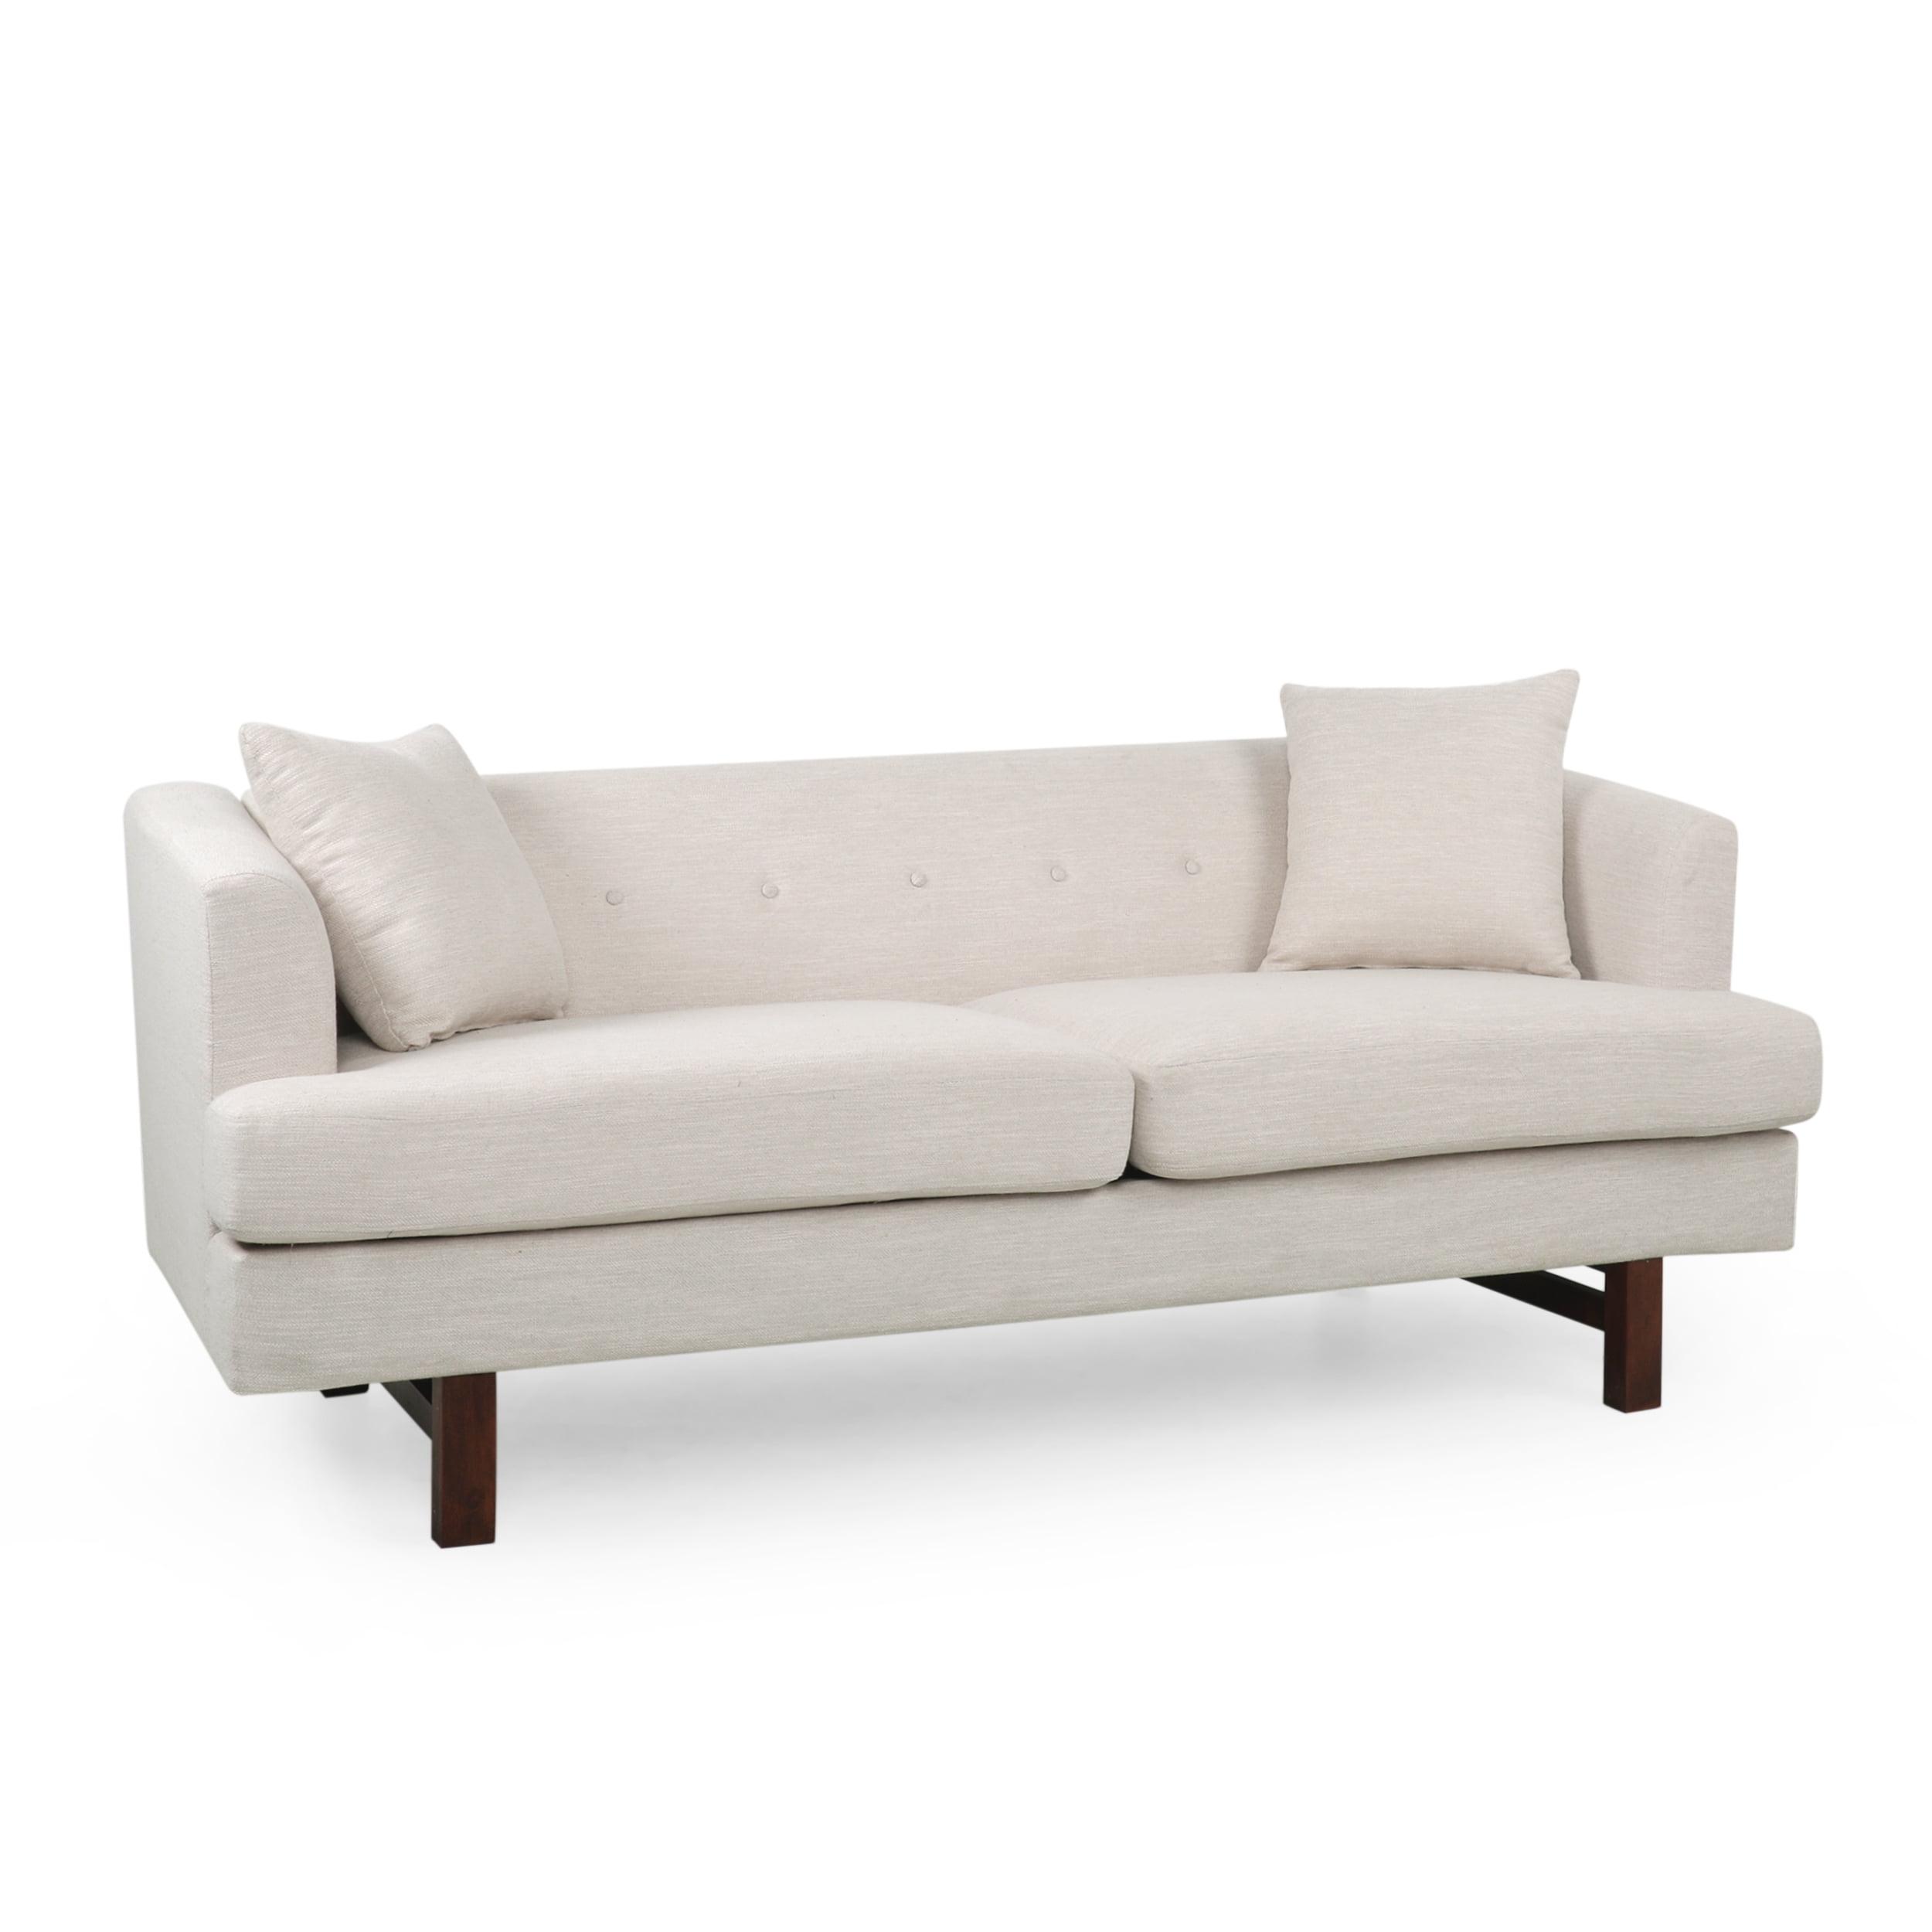 Beige Polyester Tufted 3-Seater Lawson Sofa with Espresso Wood Legs